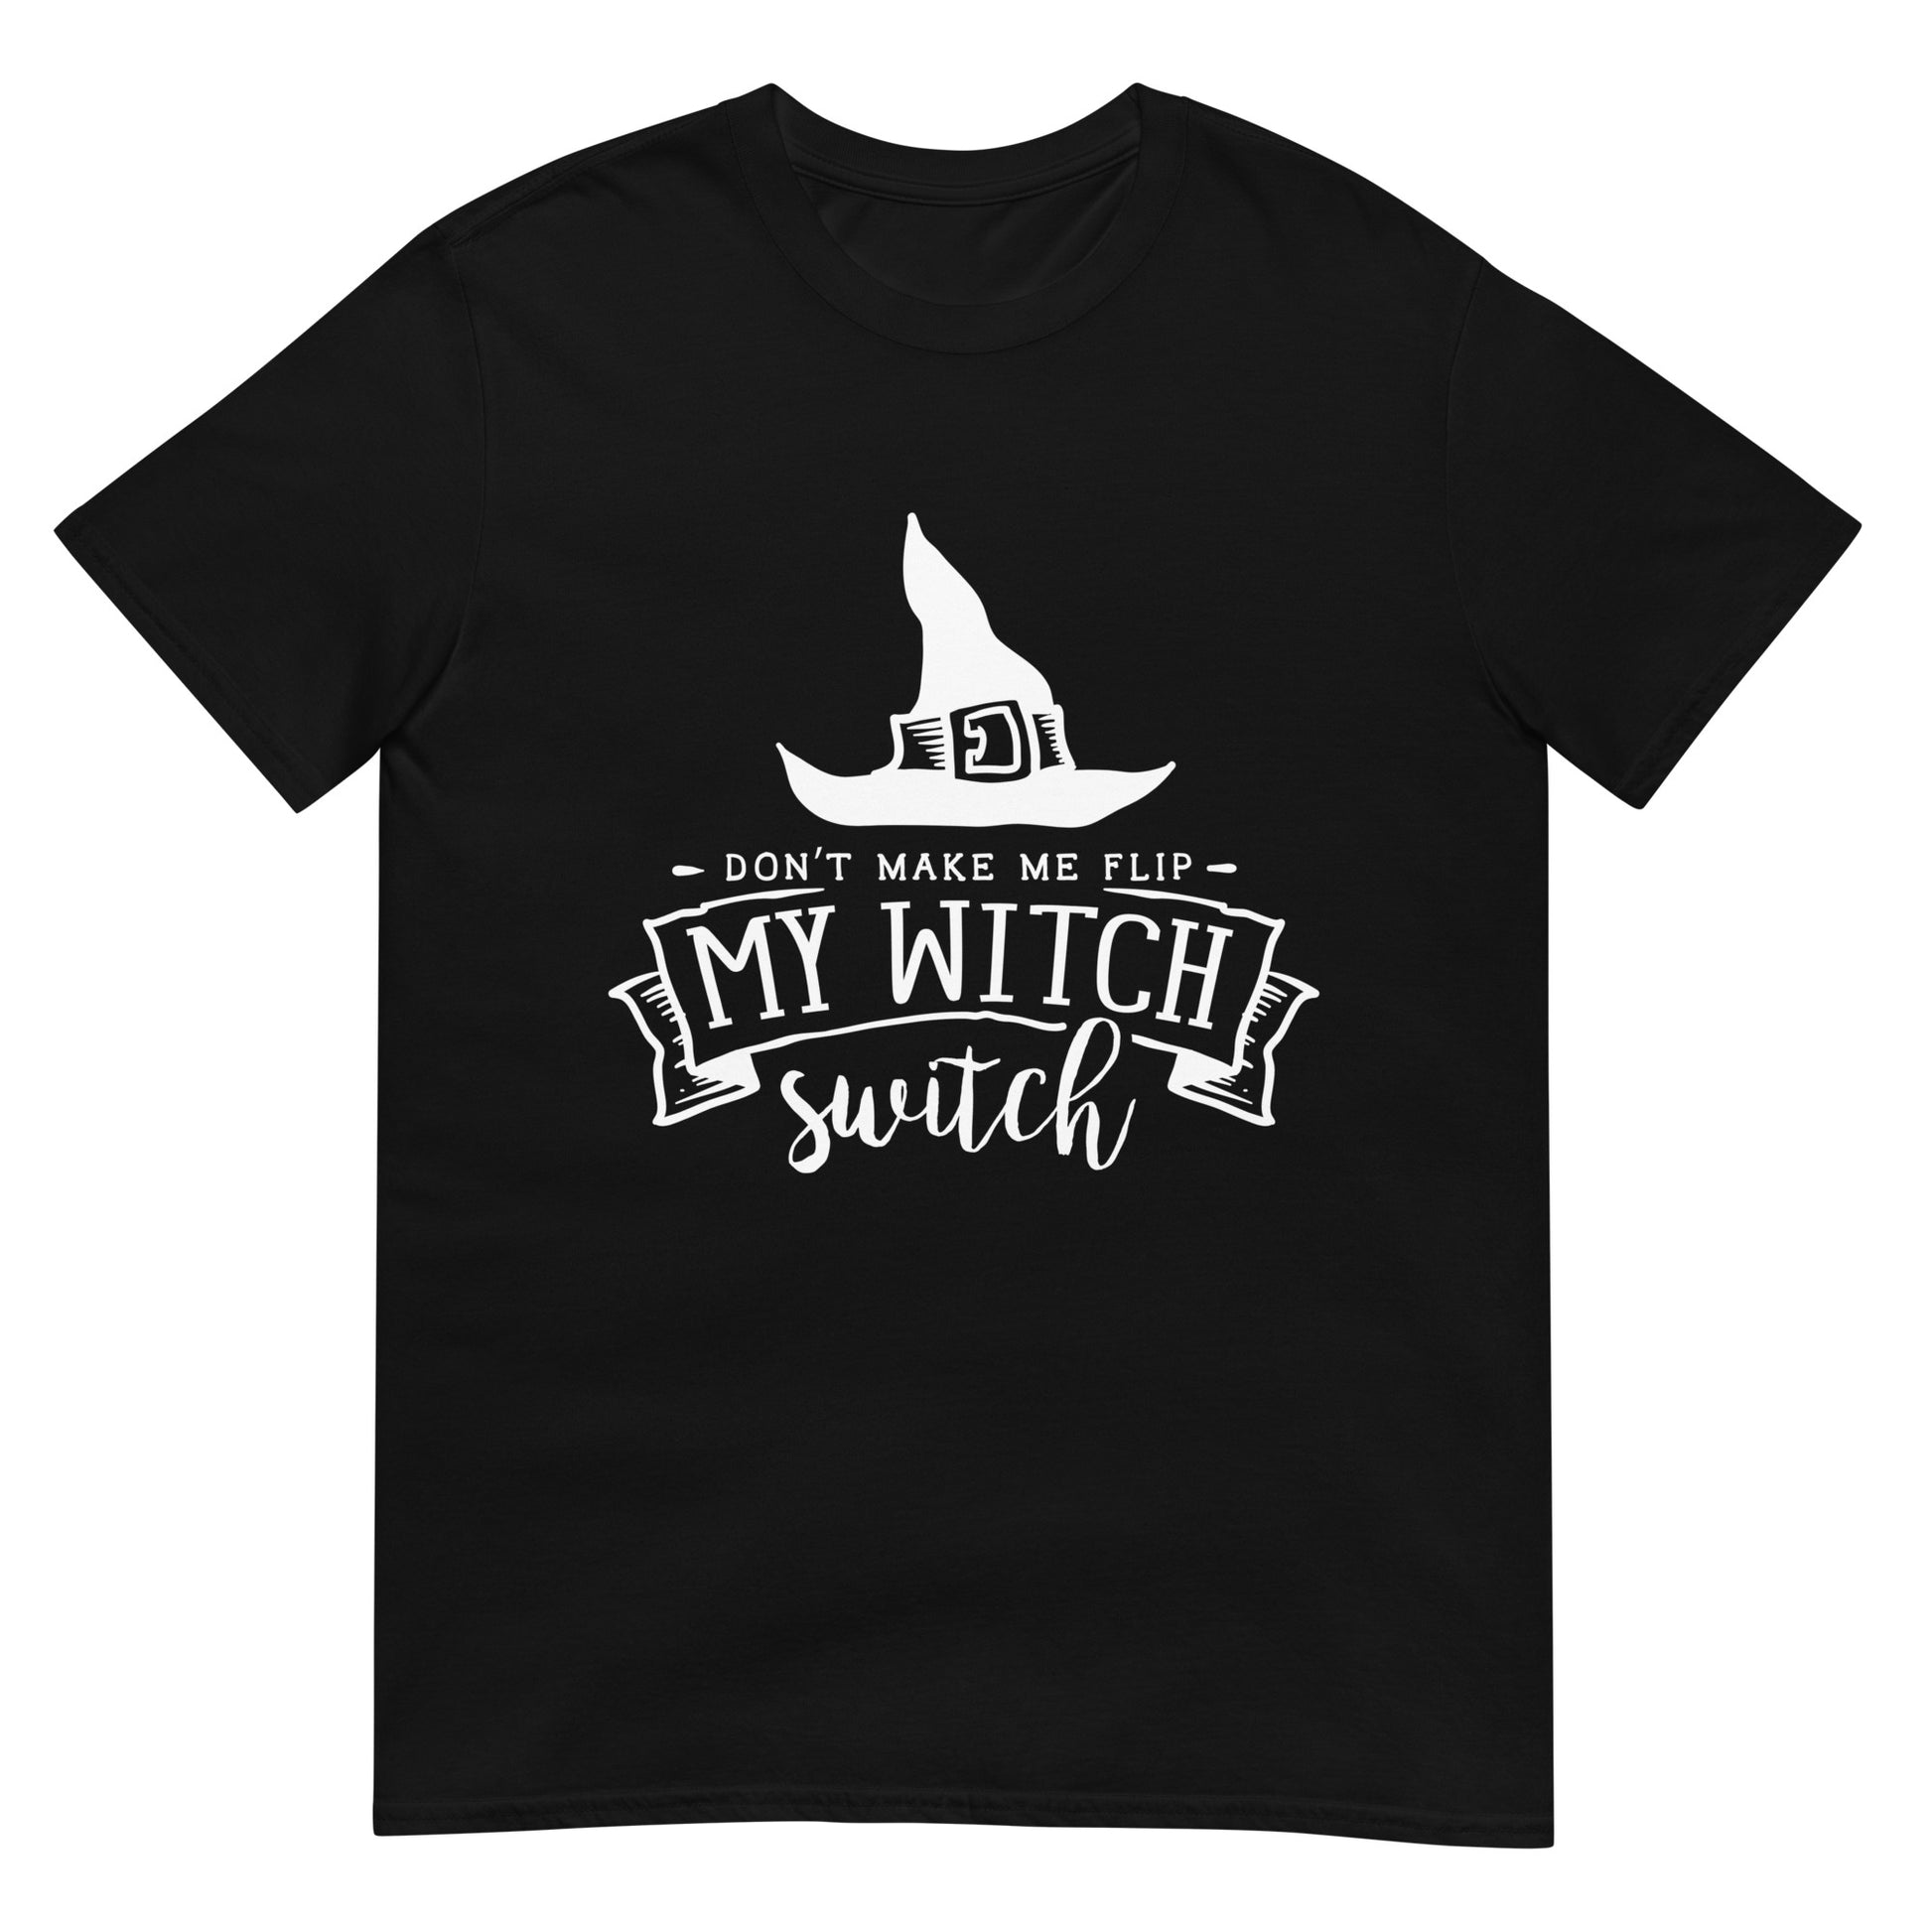 Don't Make Me Flip My Witch Switch Short-Sleeve Unisex T-Shirt.